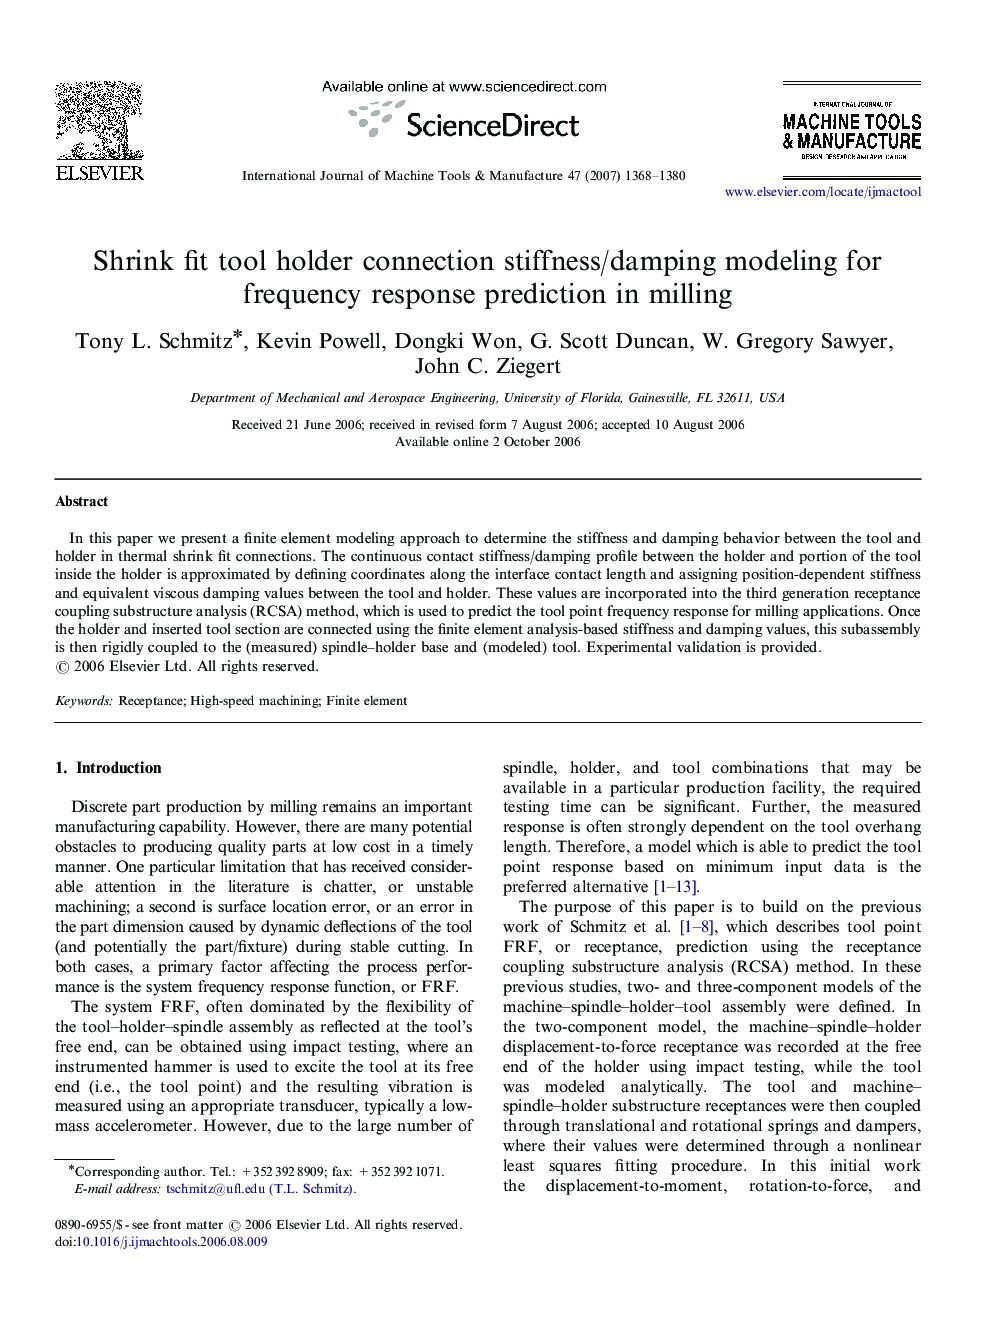 Shrink fit tool holder connection stiffness/damping modeling for frequency response prediction in milling